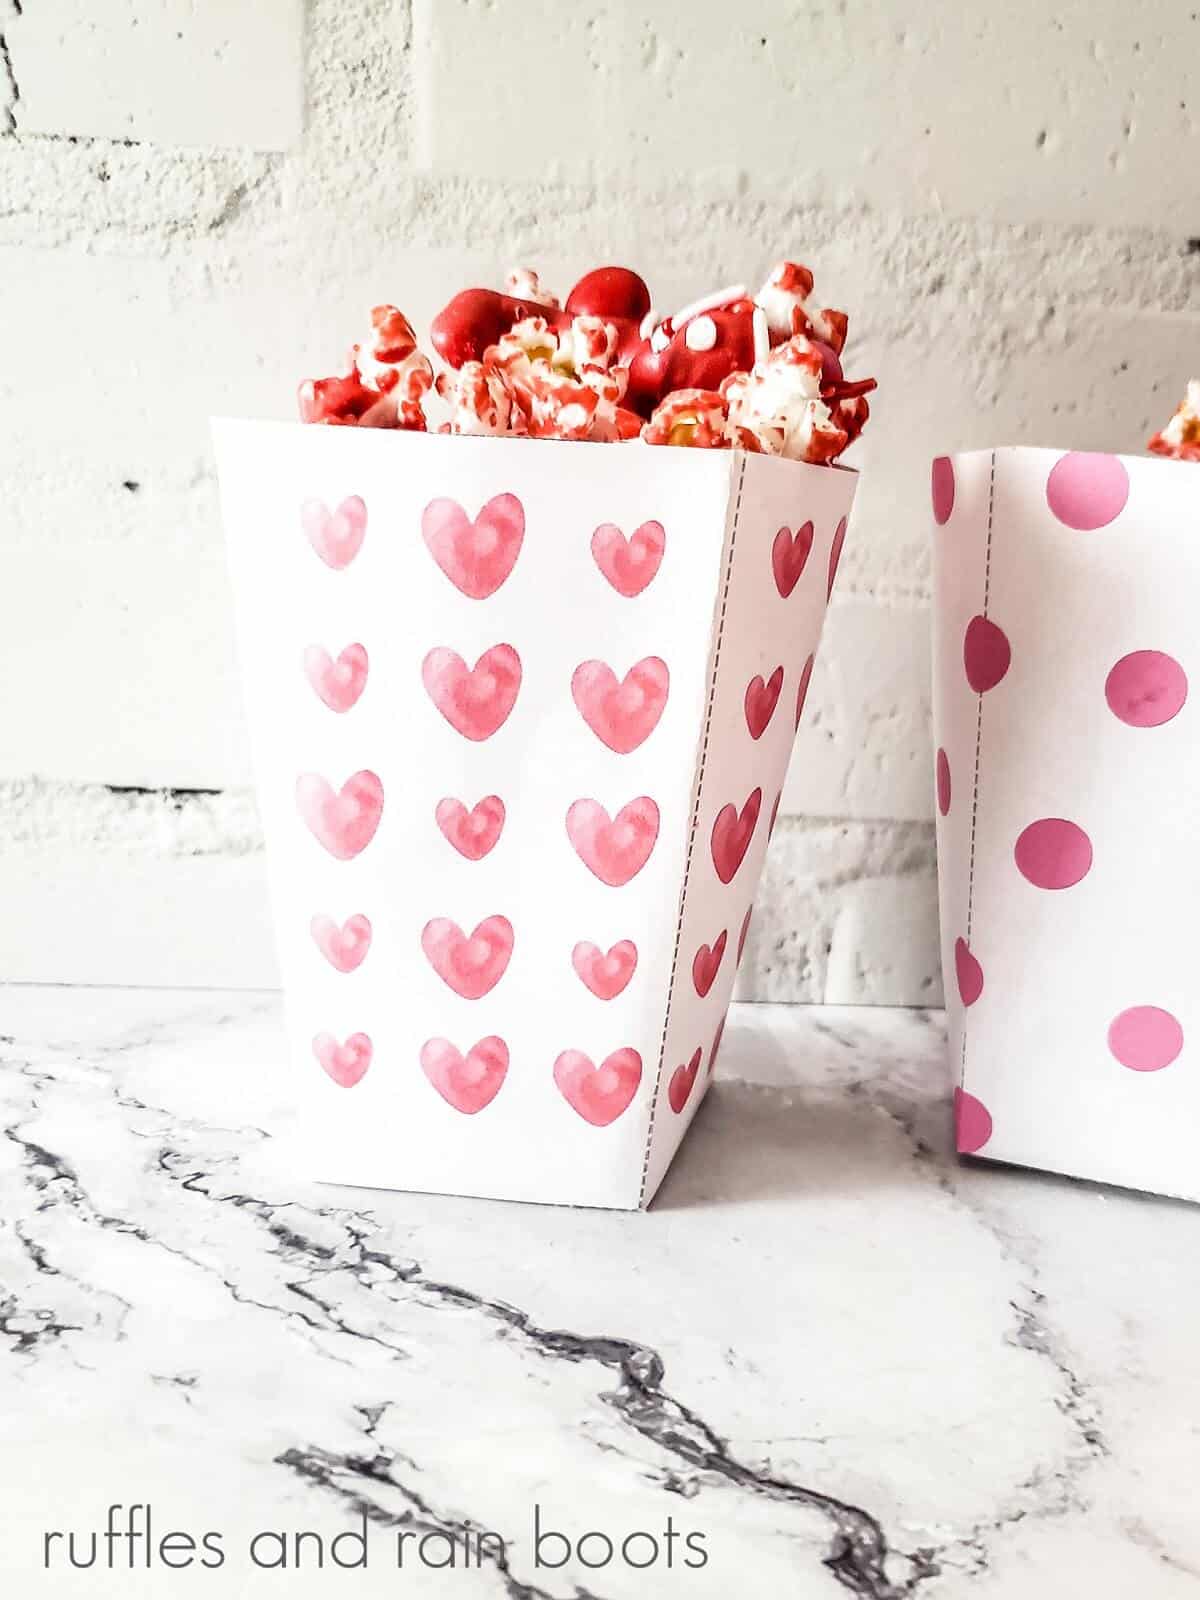 2 white vertical boxes, one with red hearts and one with red circles filled with popcorn mix on a marble surface.